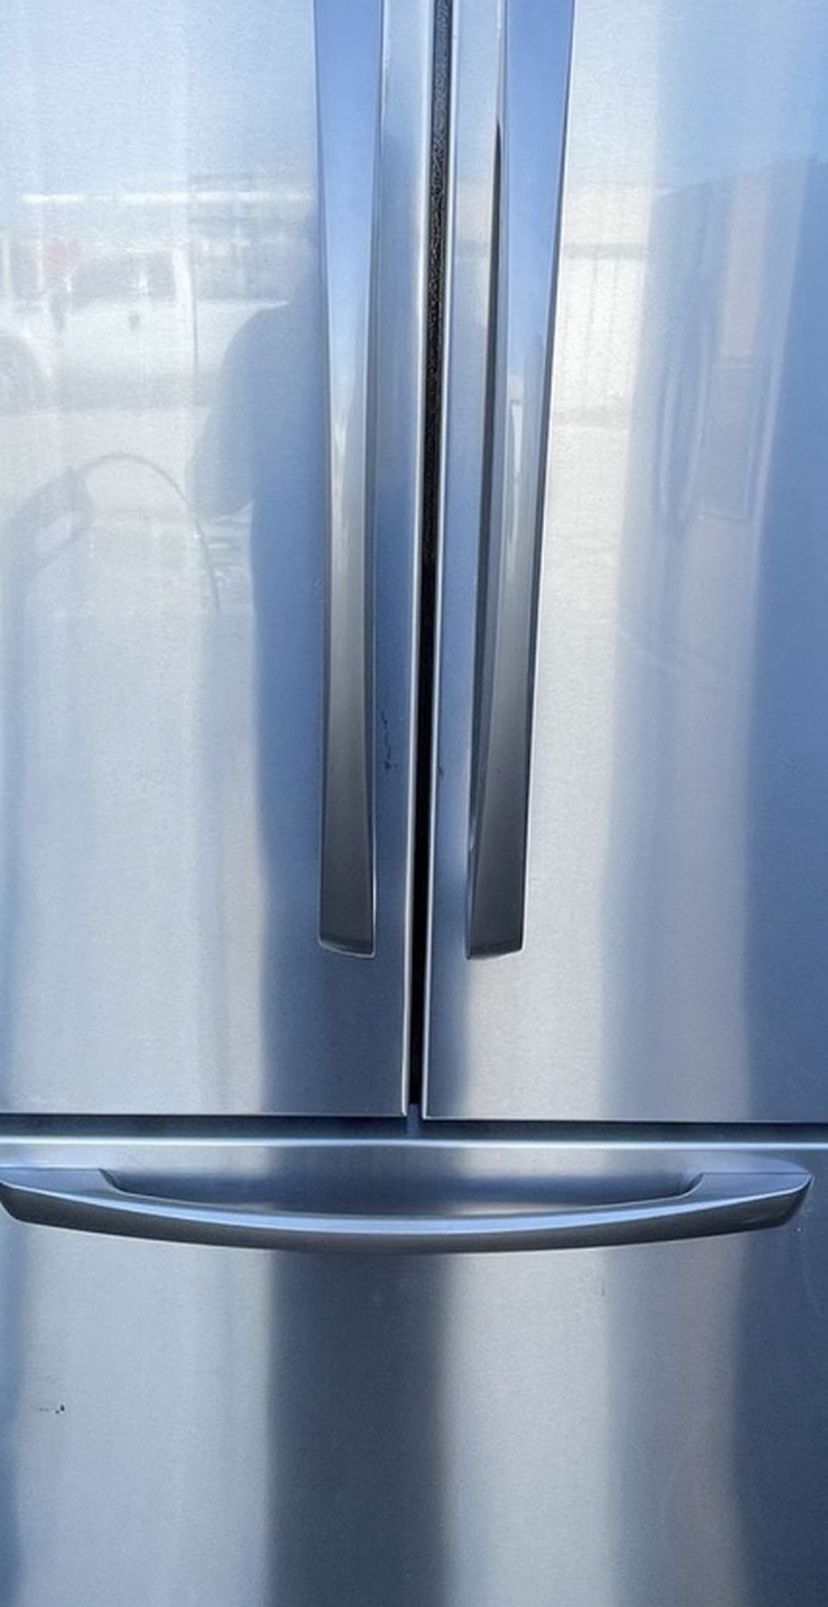 Amana Stainless Steel Refrigerator / Delivery Available